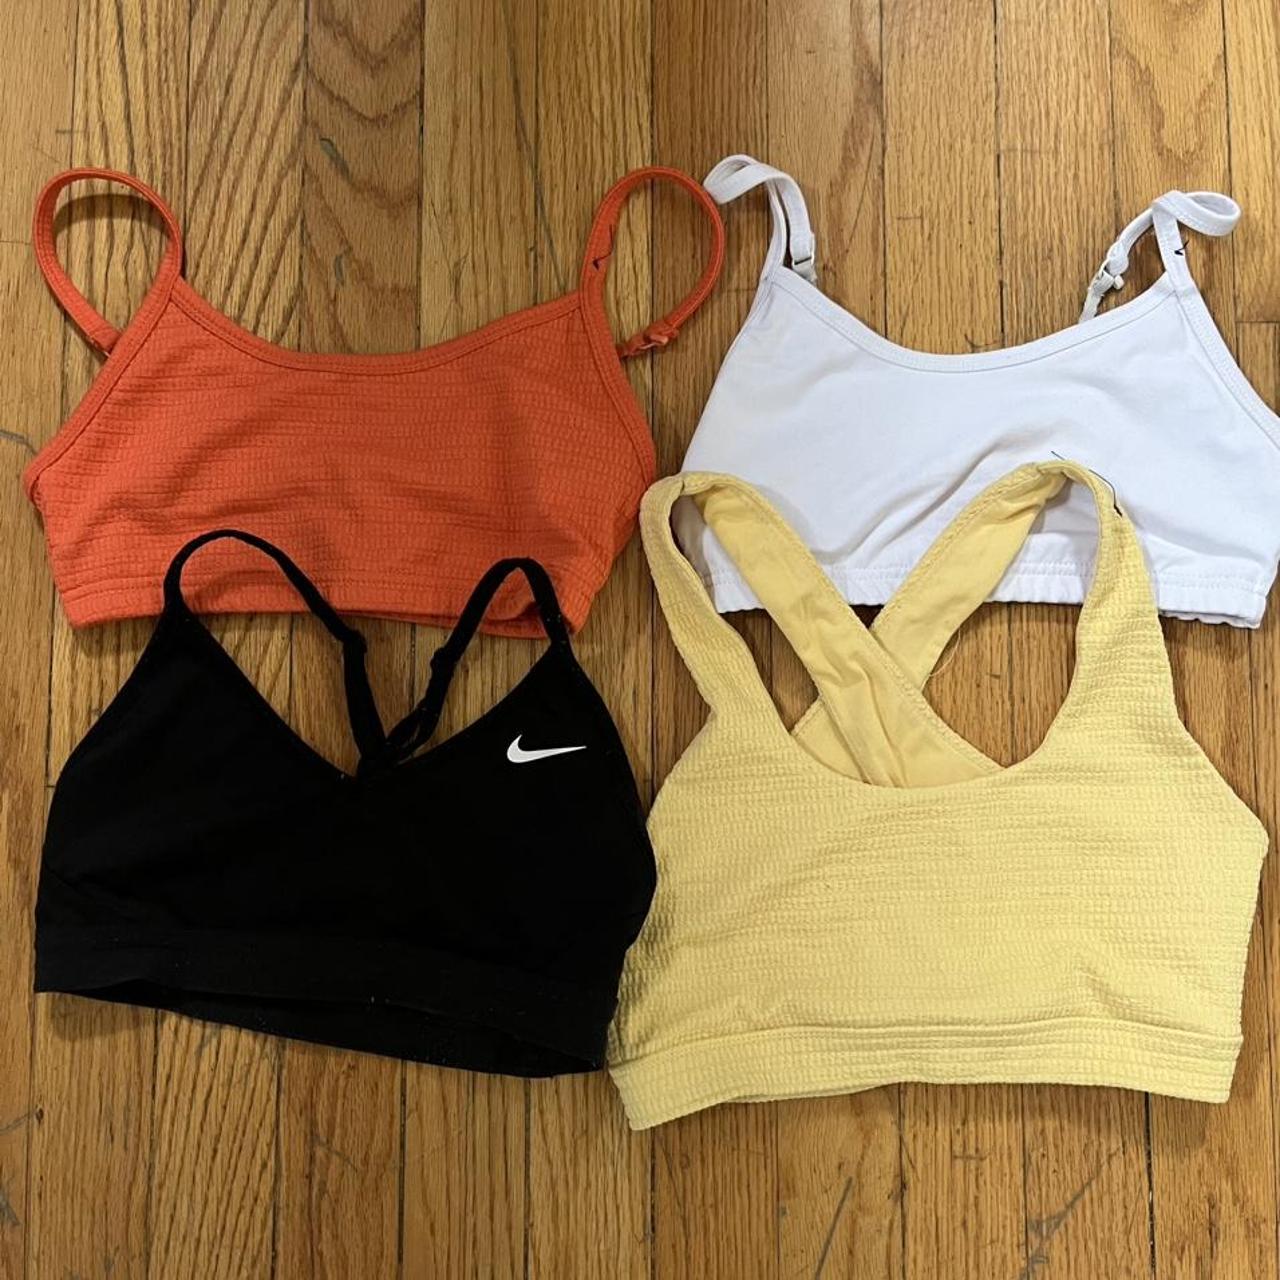 New with tag Xersion sports bra size small. Color - Depop